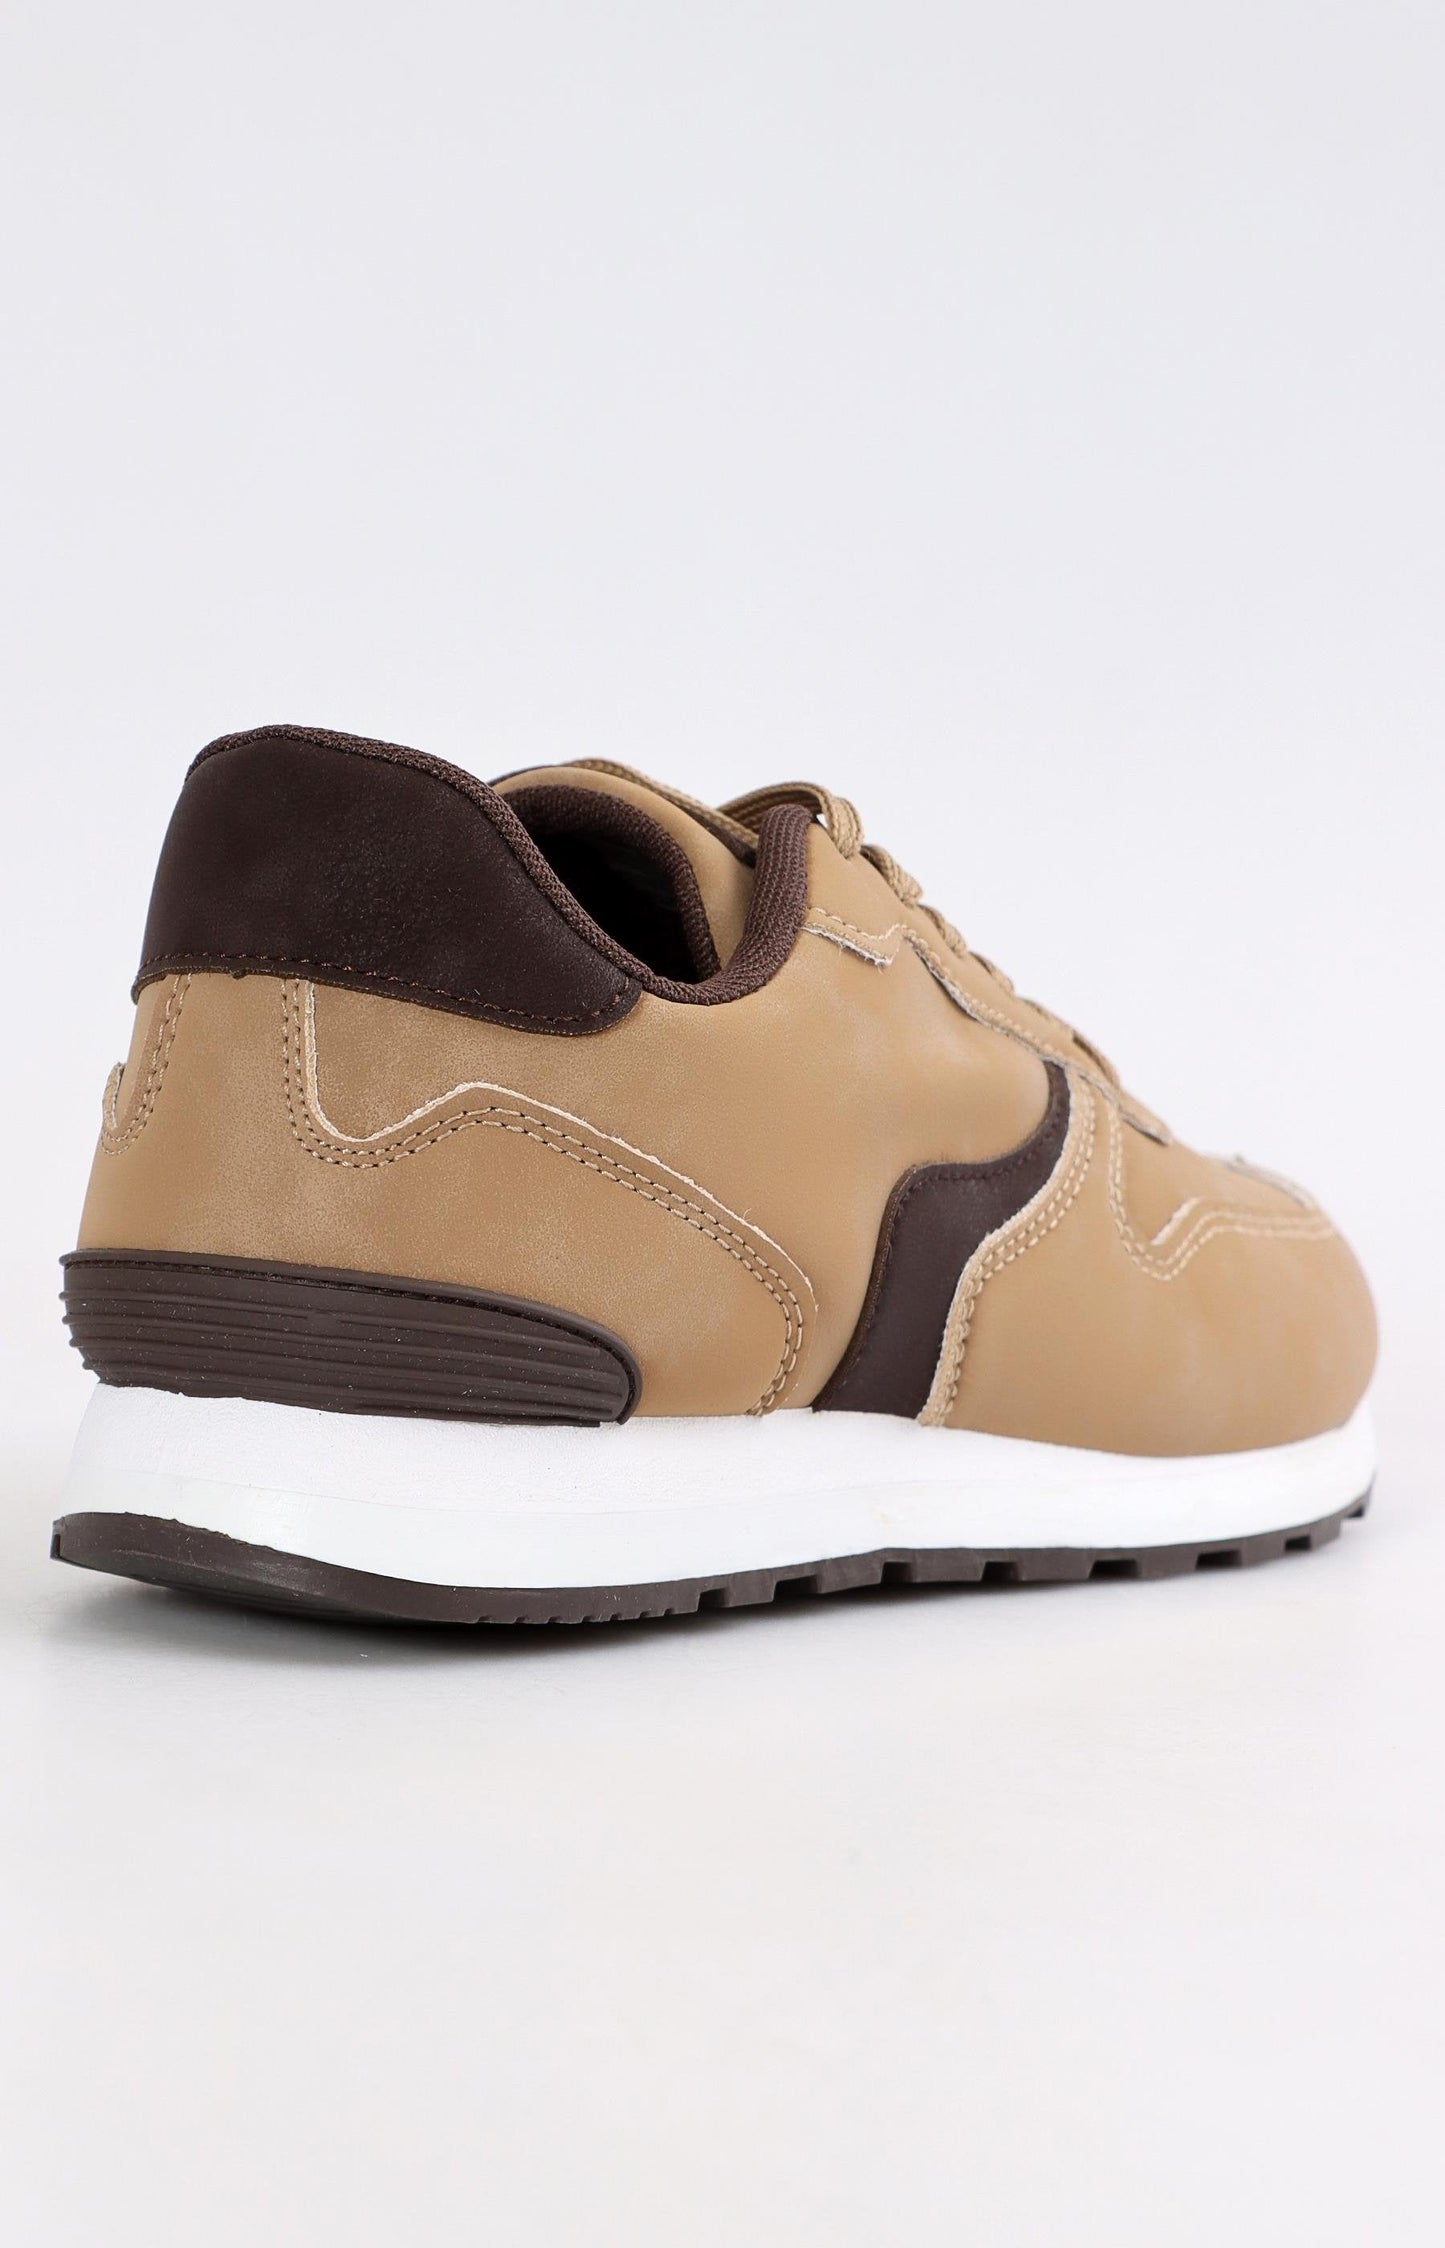 Mens Low Cut Casual Sneakers - Taupe